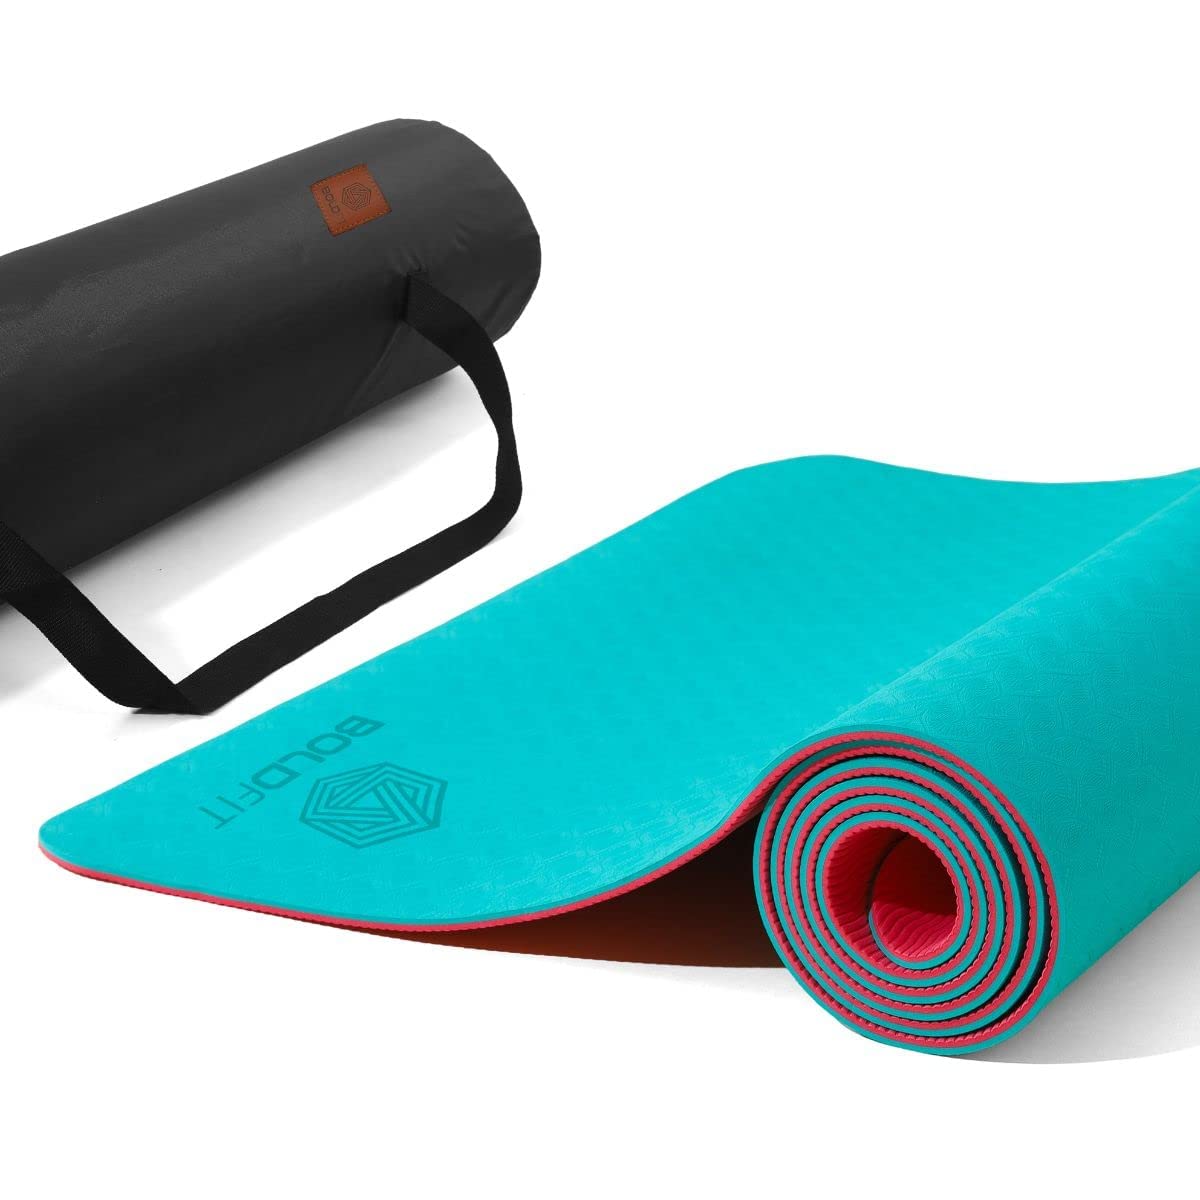 Premium Clever Yoga Mat - Extra Long Yoga Mat Suitable For All Yoga Types -  Workout Mat For Home Or On The Go - Includes Our Perfect Fit Mat Bag